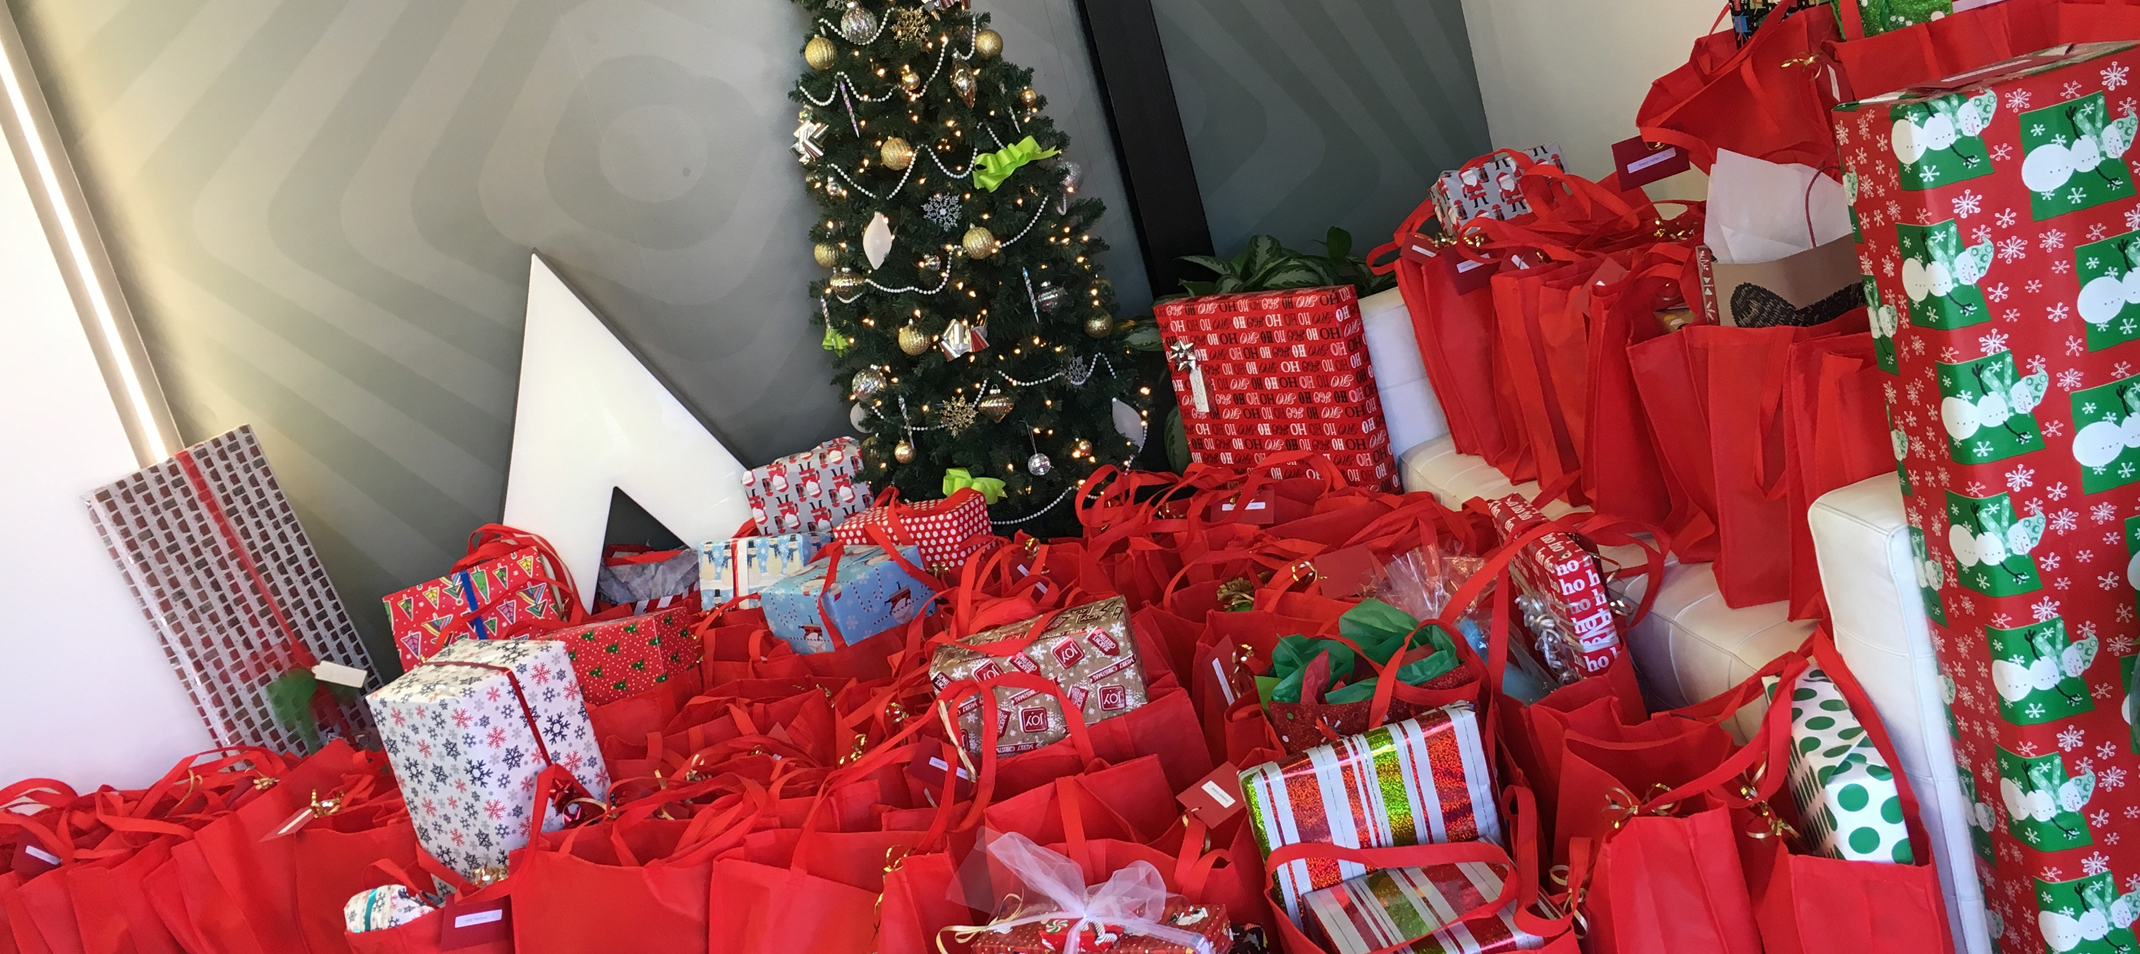 Christmas gifts for disadvantaged children donated by Adcetera employees through Mission Centers of Houston.